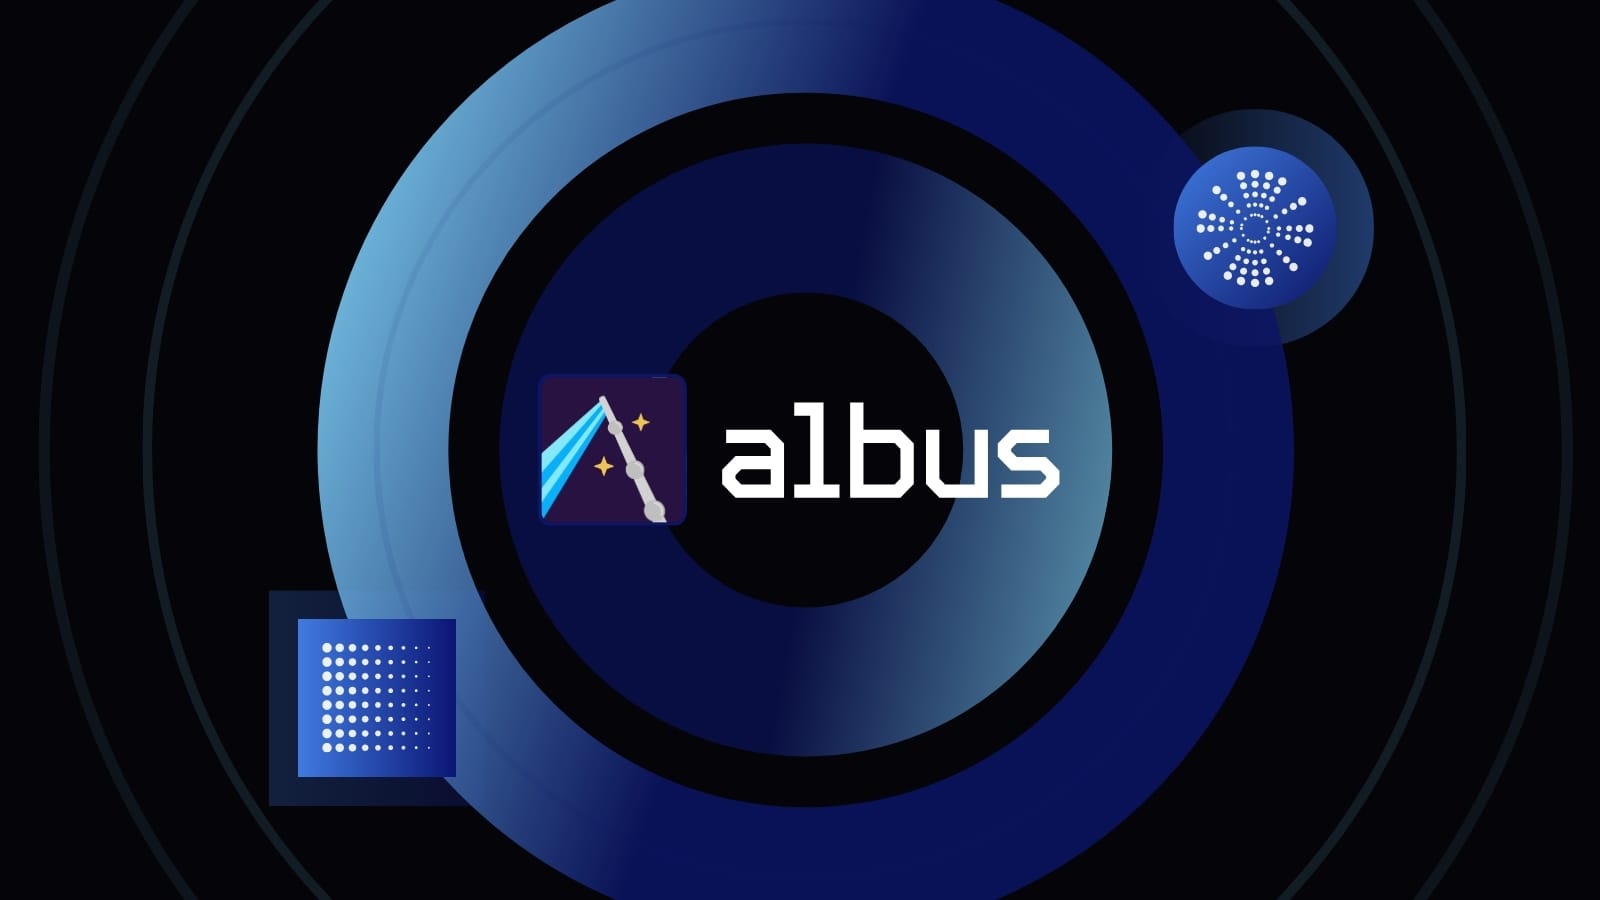 Albus logo in white on a dark blue background, surrounded by abstract blue shapes and symbols.